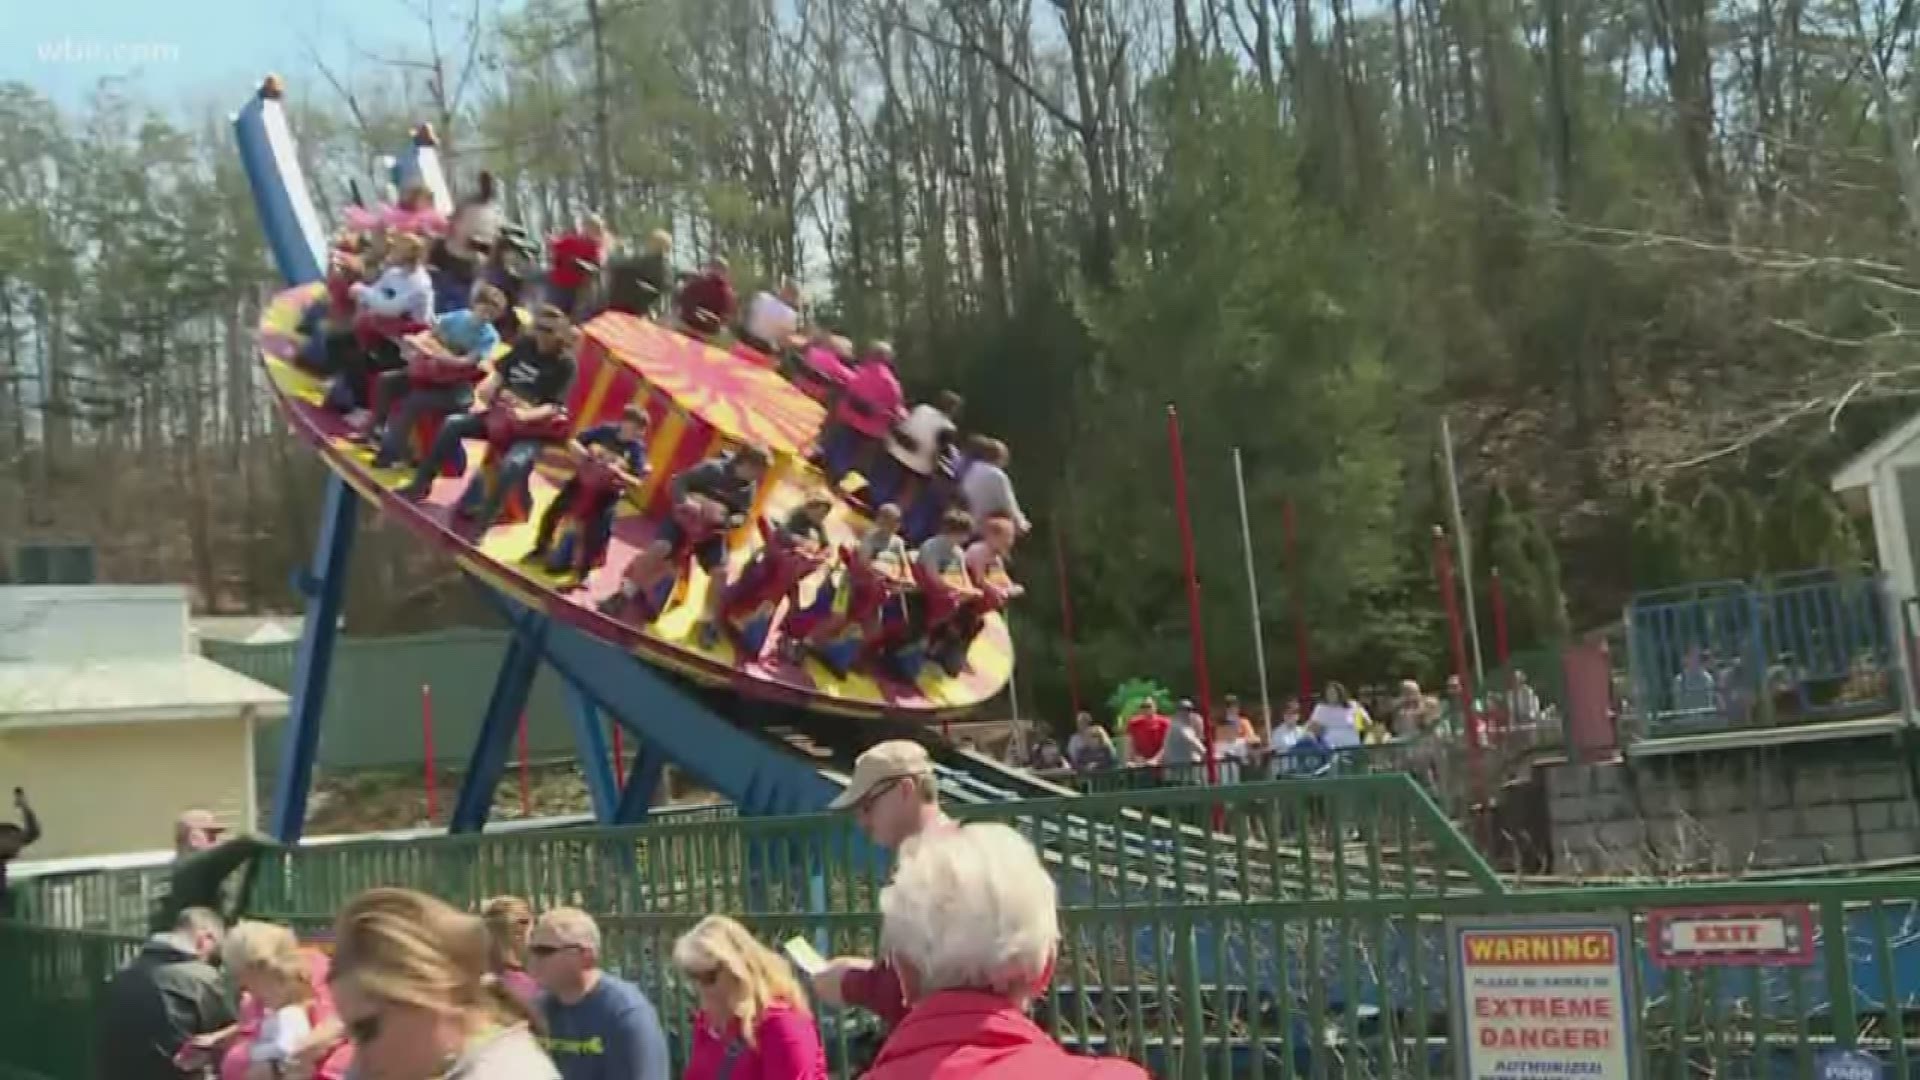 March 16, 2018: Springtime in East Tennessee means Dollywood reopens for the season.